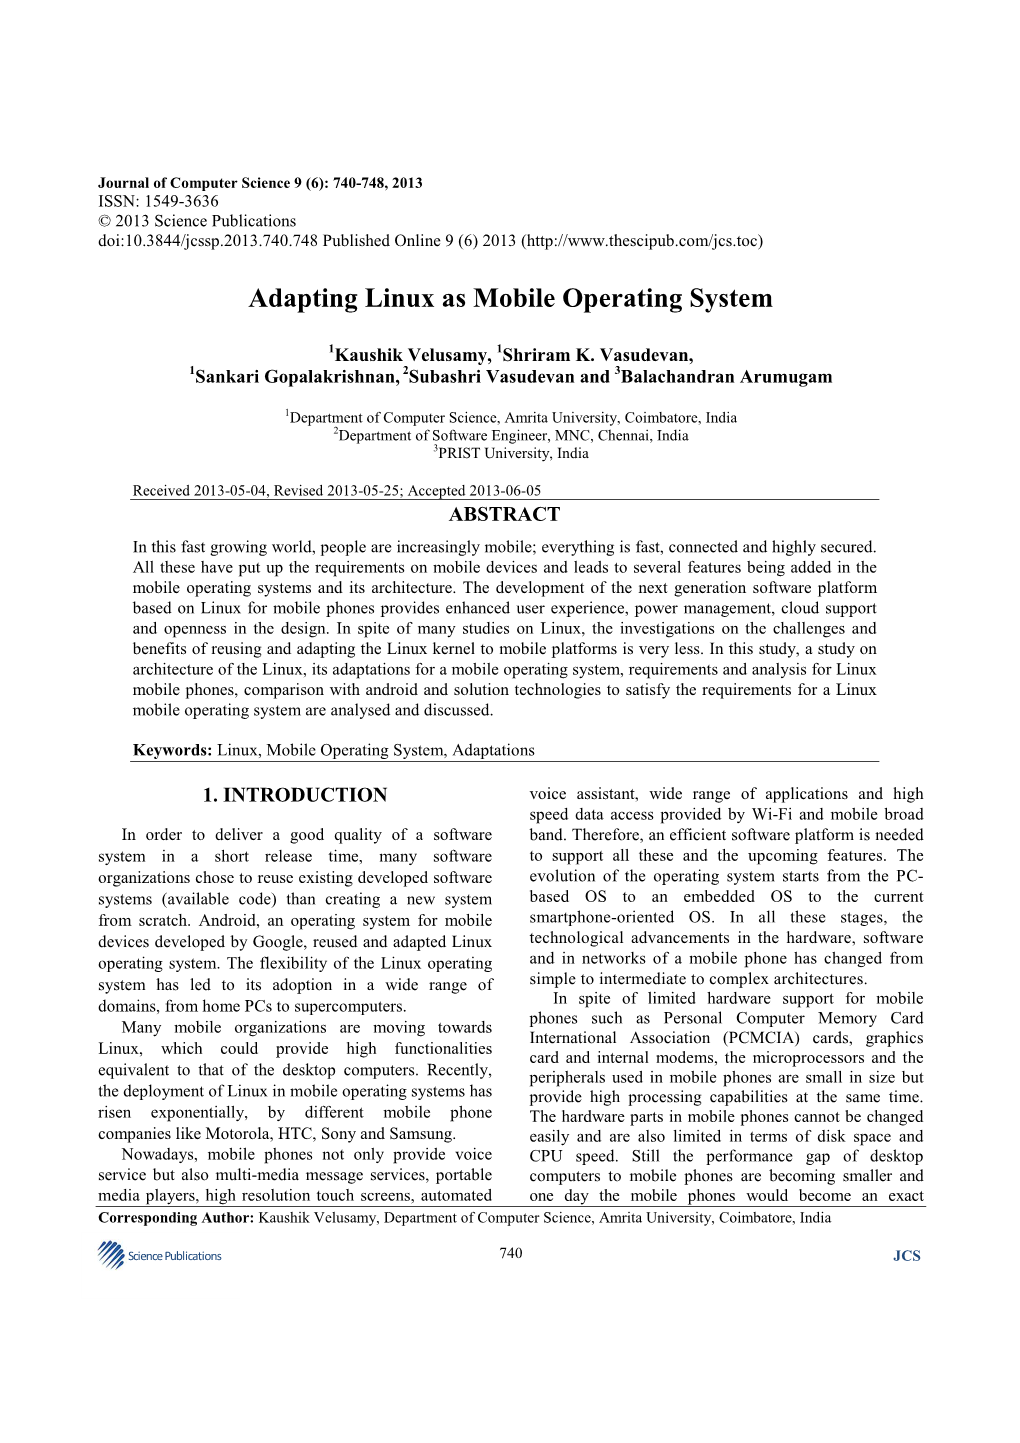 Adapting Linux As Mobile Operating System